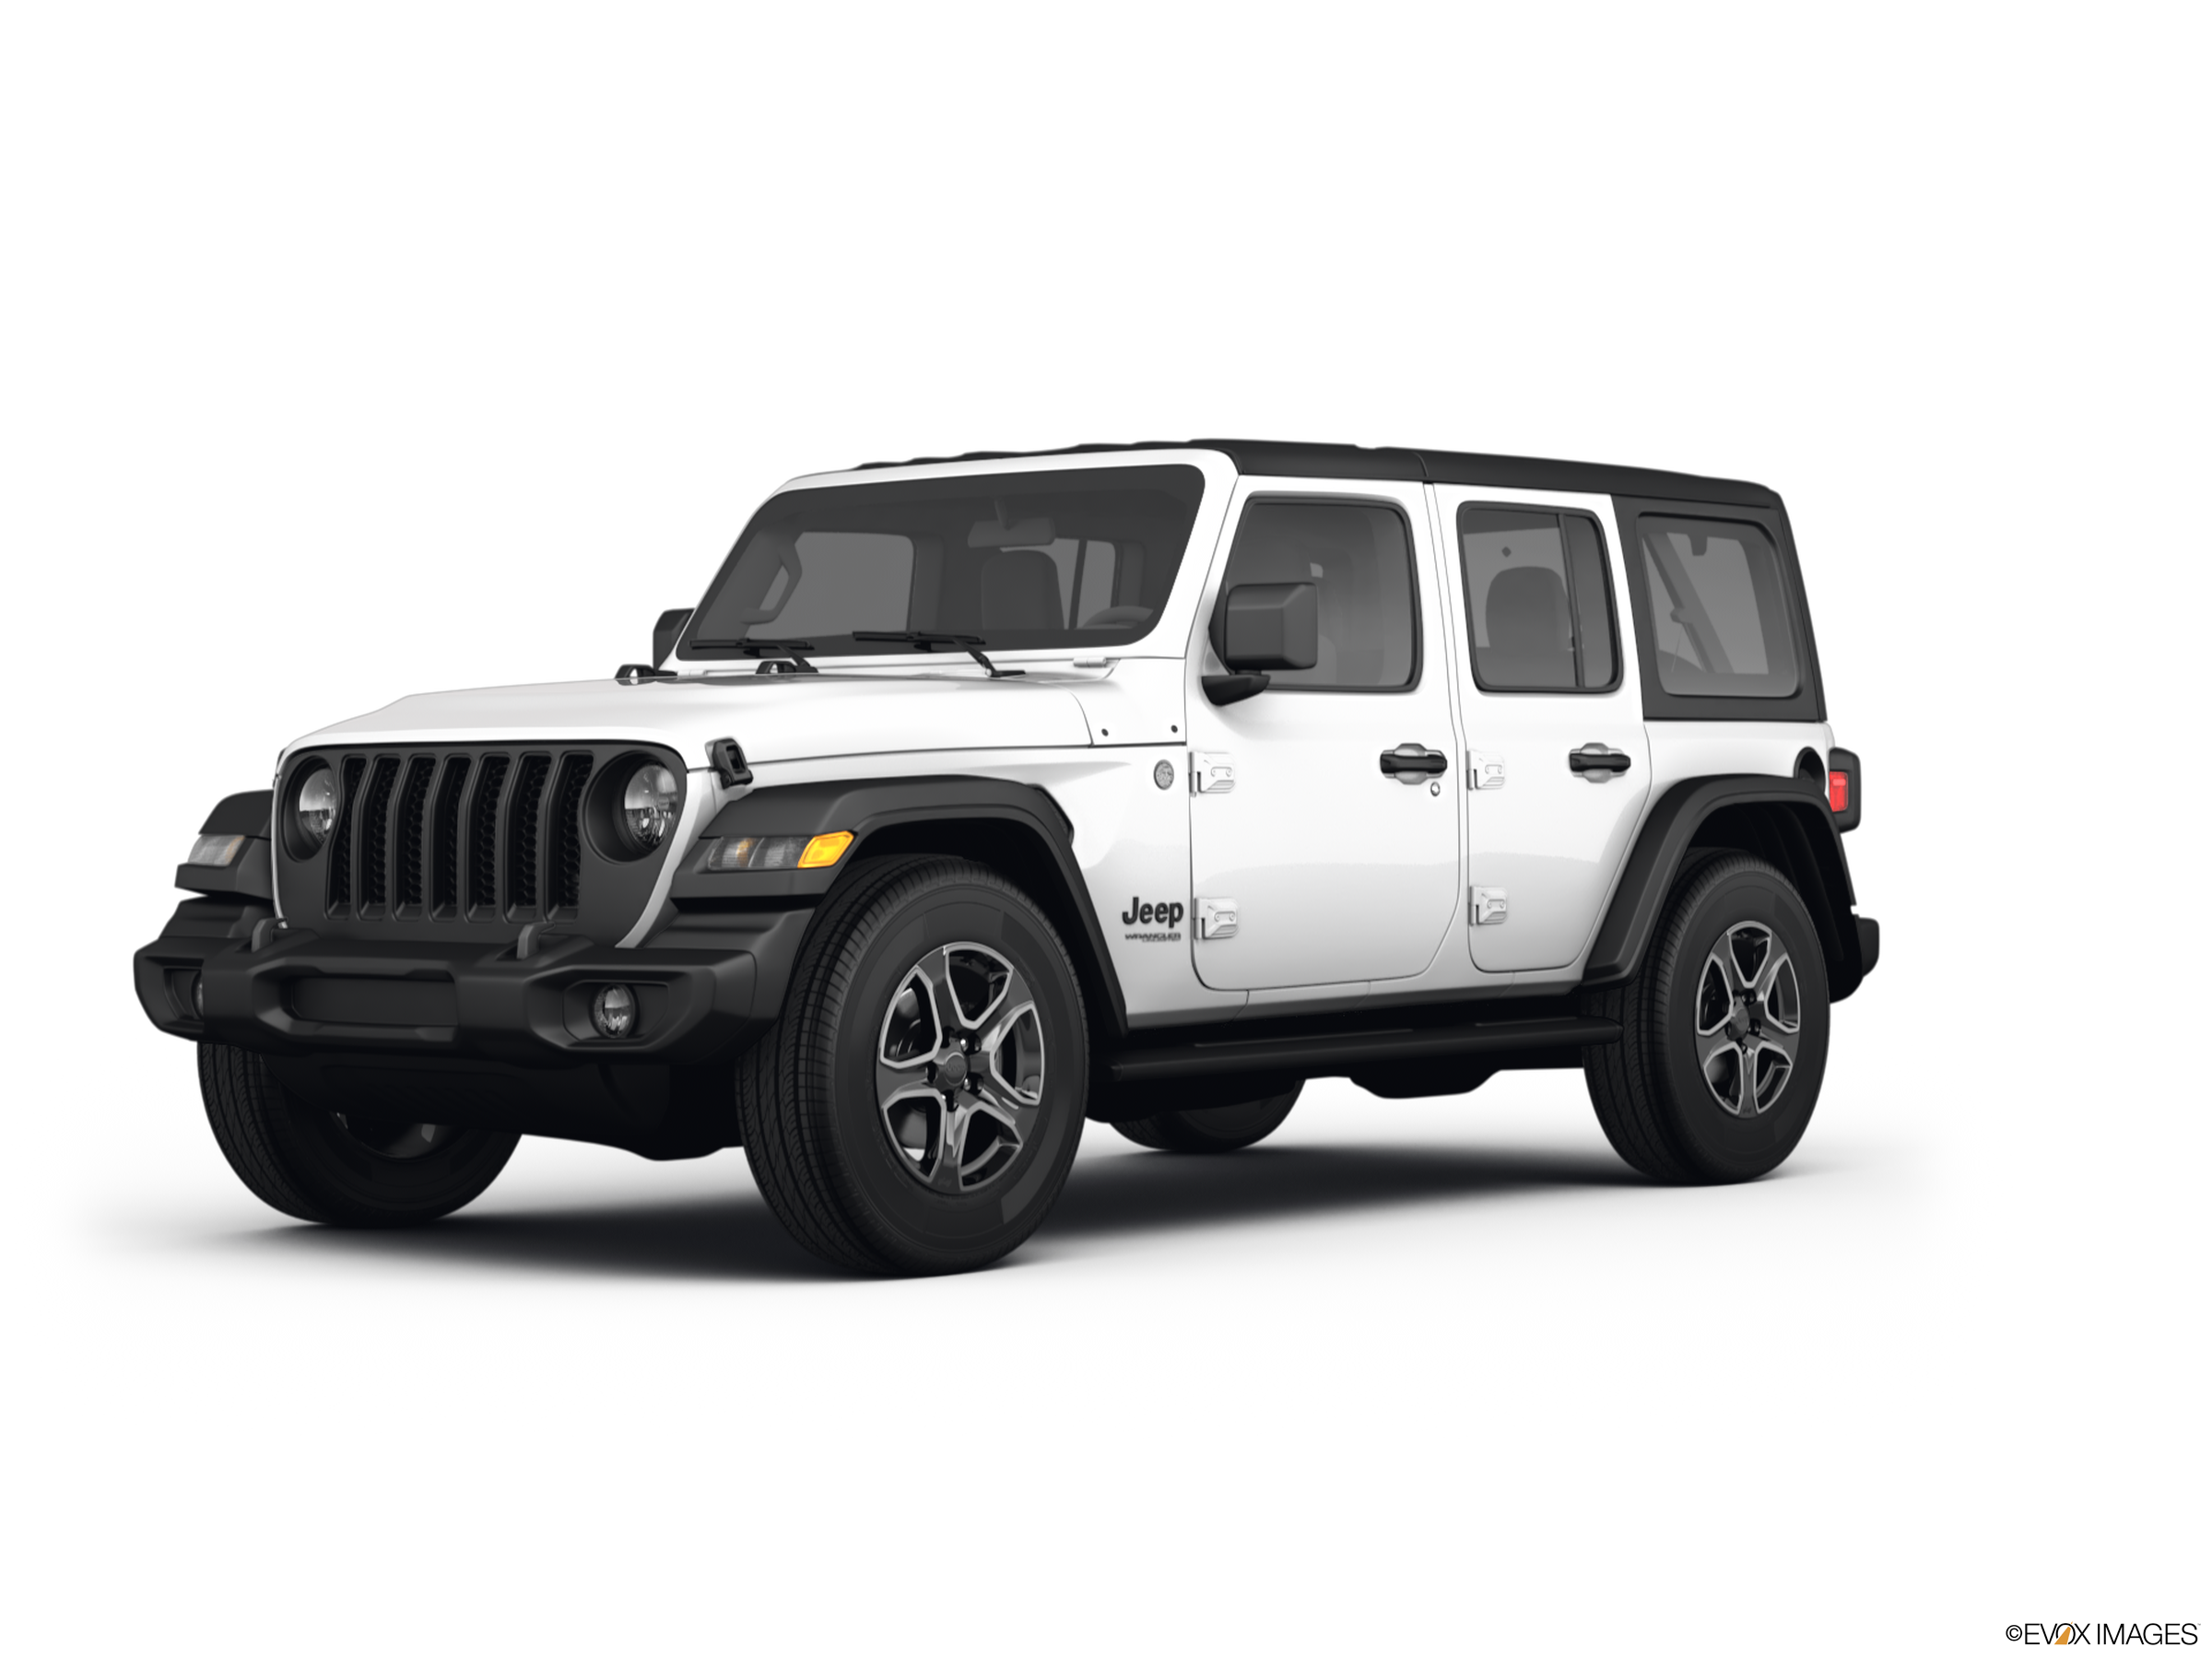 New 2022 Jeep Wrangler Unlimited Sport Altitude Prices | Kelley Blue Book